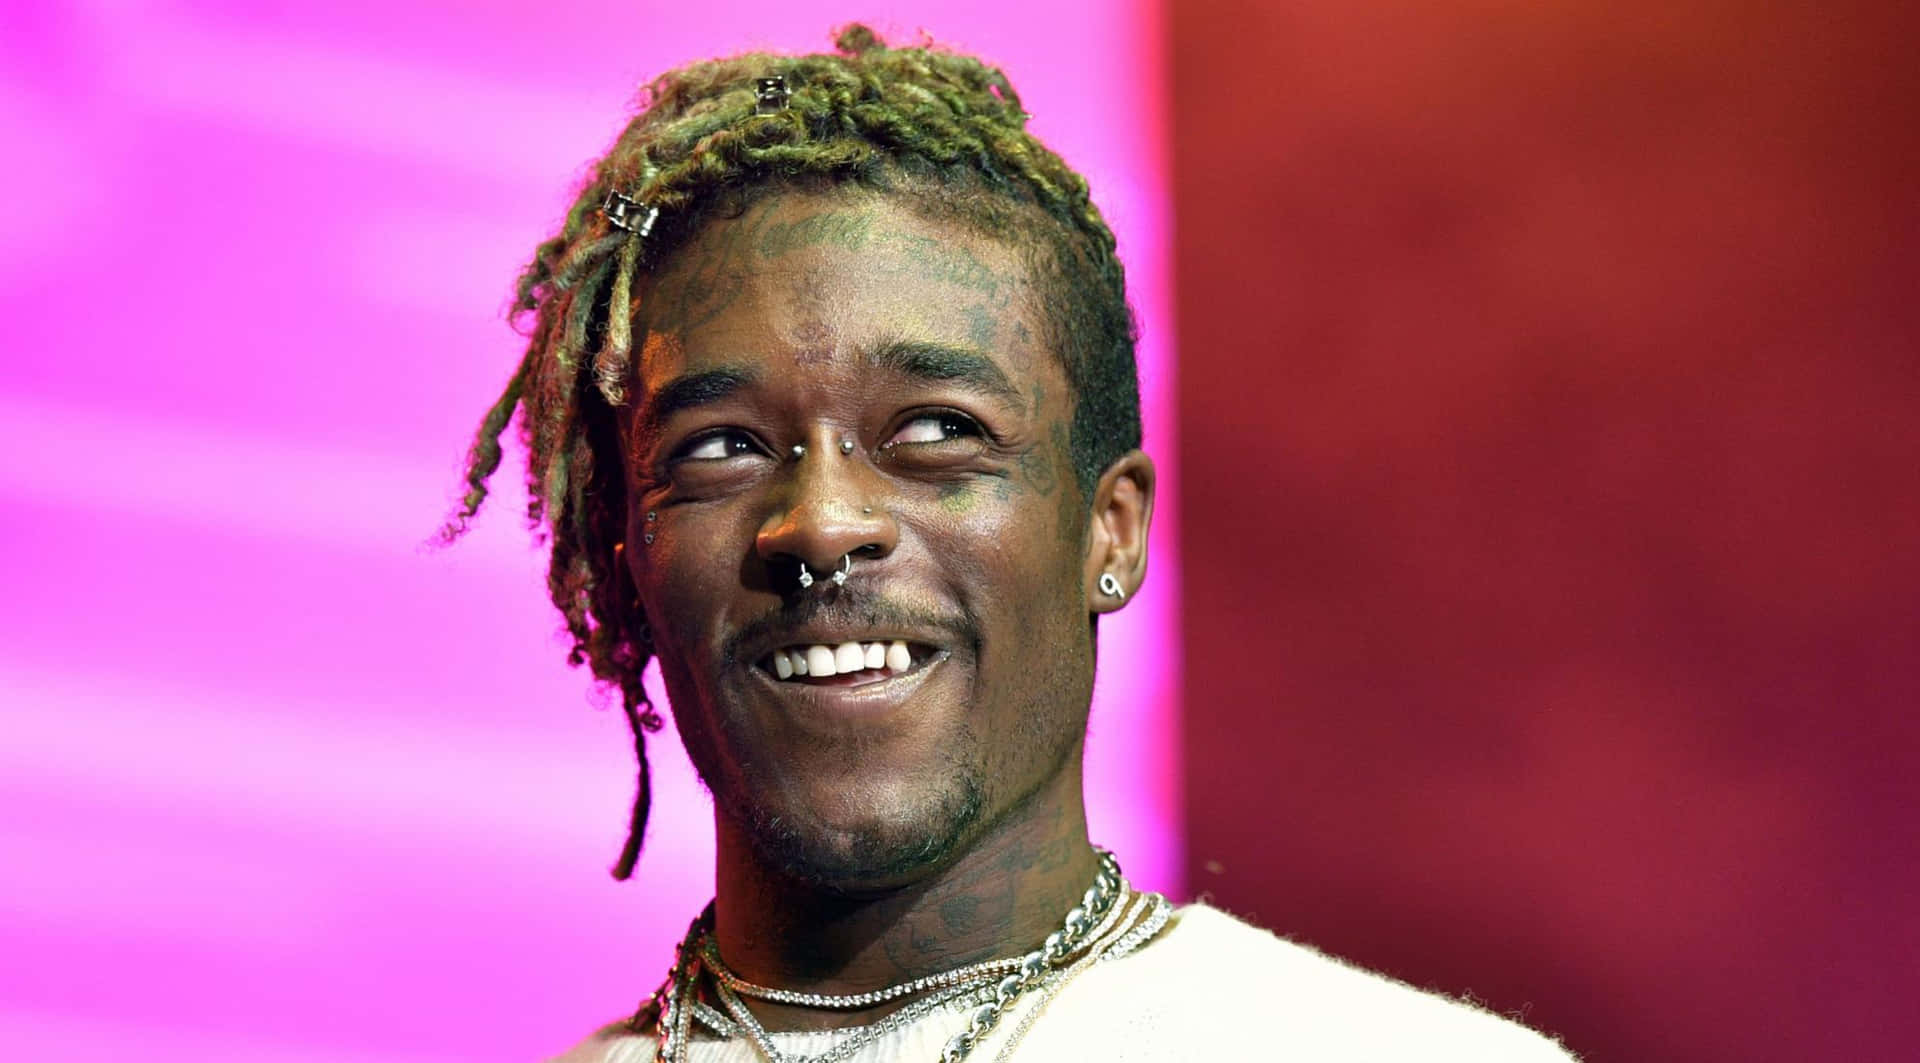 Lil Uzi Vert striking a pose in a stylish outfit